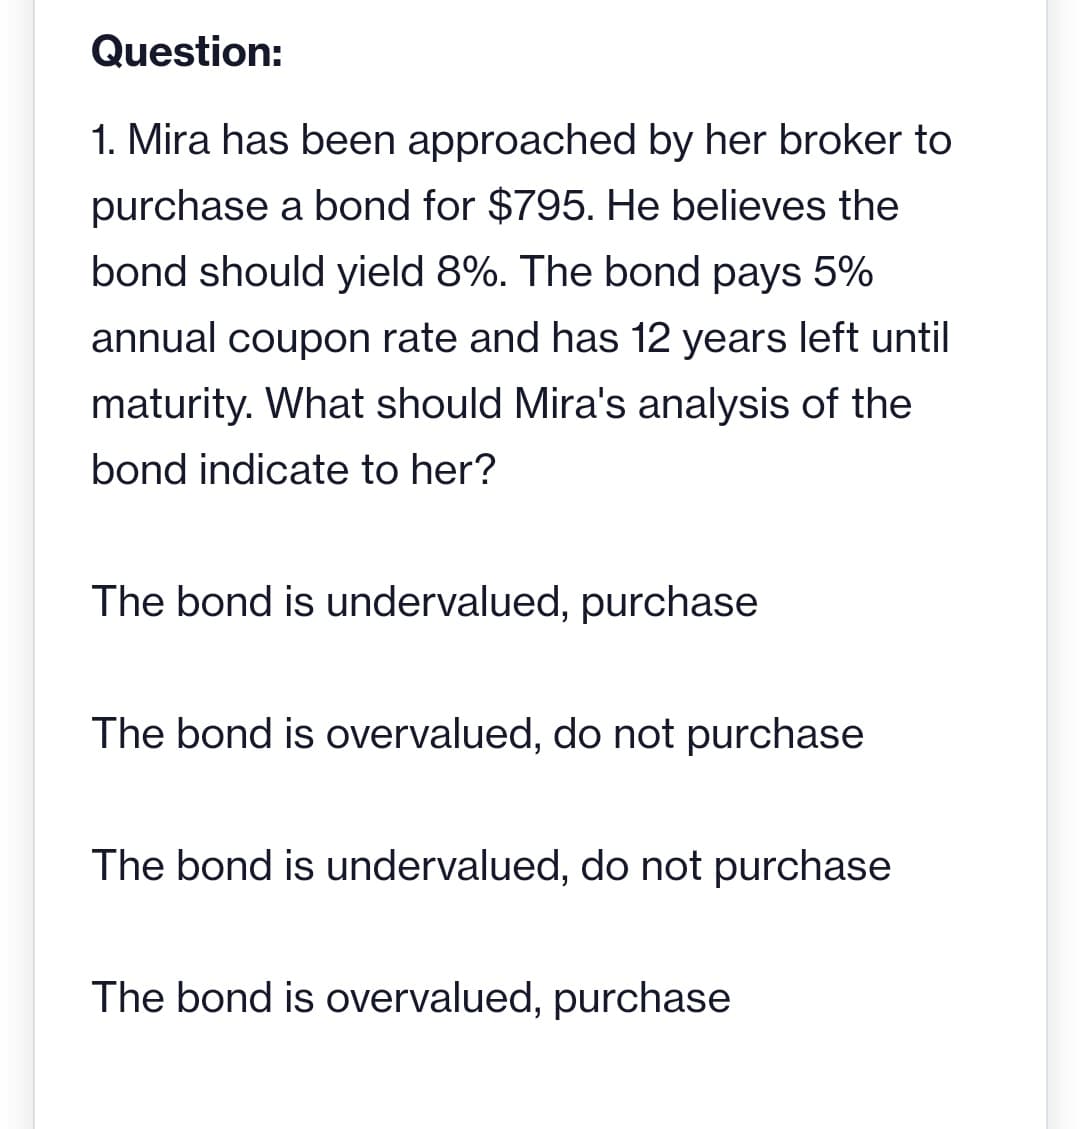 Question:
1. Mira has been approached by her broker to
purchase a bond for $795. He believes the
bond should yield 8%. The bond pays 5%
annual coupon rate and has 12 years left until
maturity. What should Mira's analysis of the
bond indicate to her?
The bond is undervalued, purchase
The bond is overvalued, do not purchase
The bond is undervalued, do not purchase
The bond is overvalued, purchase